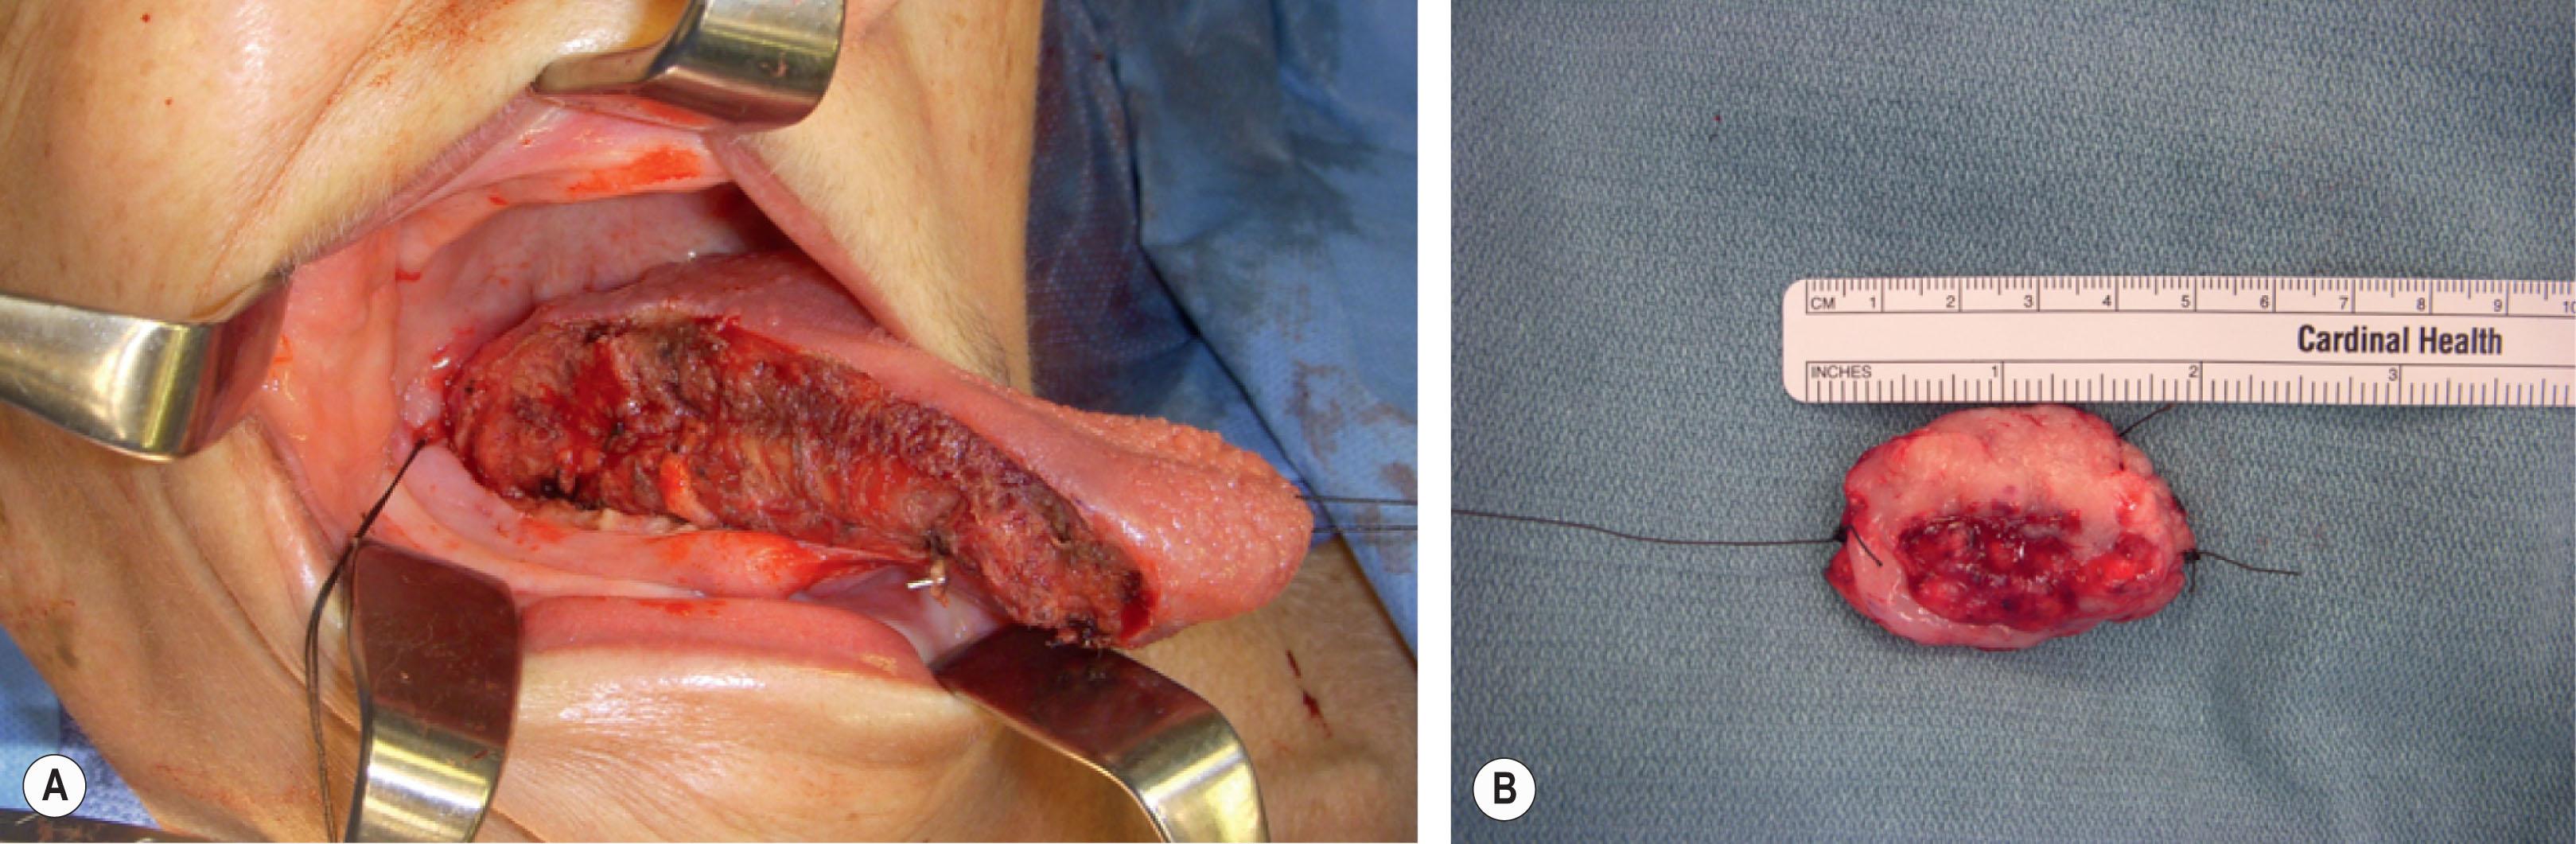 Figure 8.8, (A) Transoral resection of a lateral tongue border squamous cell carcinoma. Note access to the posterior limit of the oral cavity. (B) The surgical specimen demonstrating that adequate resection margins are obtainable with this technique, which avoids the morbidity of mandibulotomy.